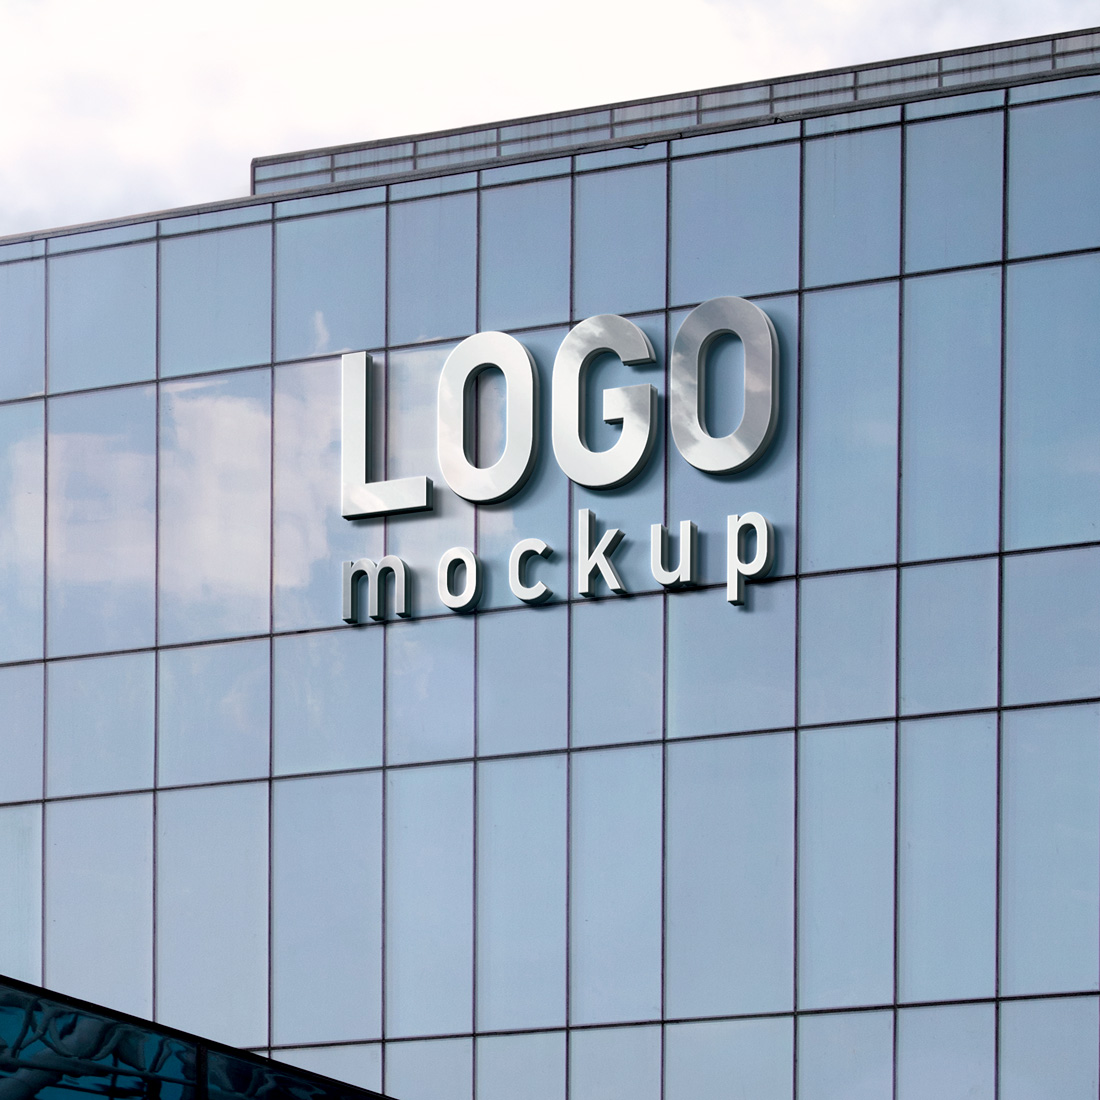 silver letters on glass building mockup 854